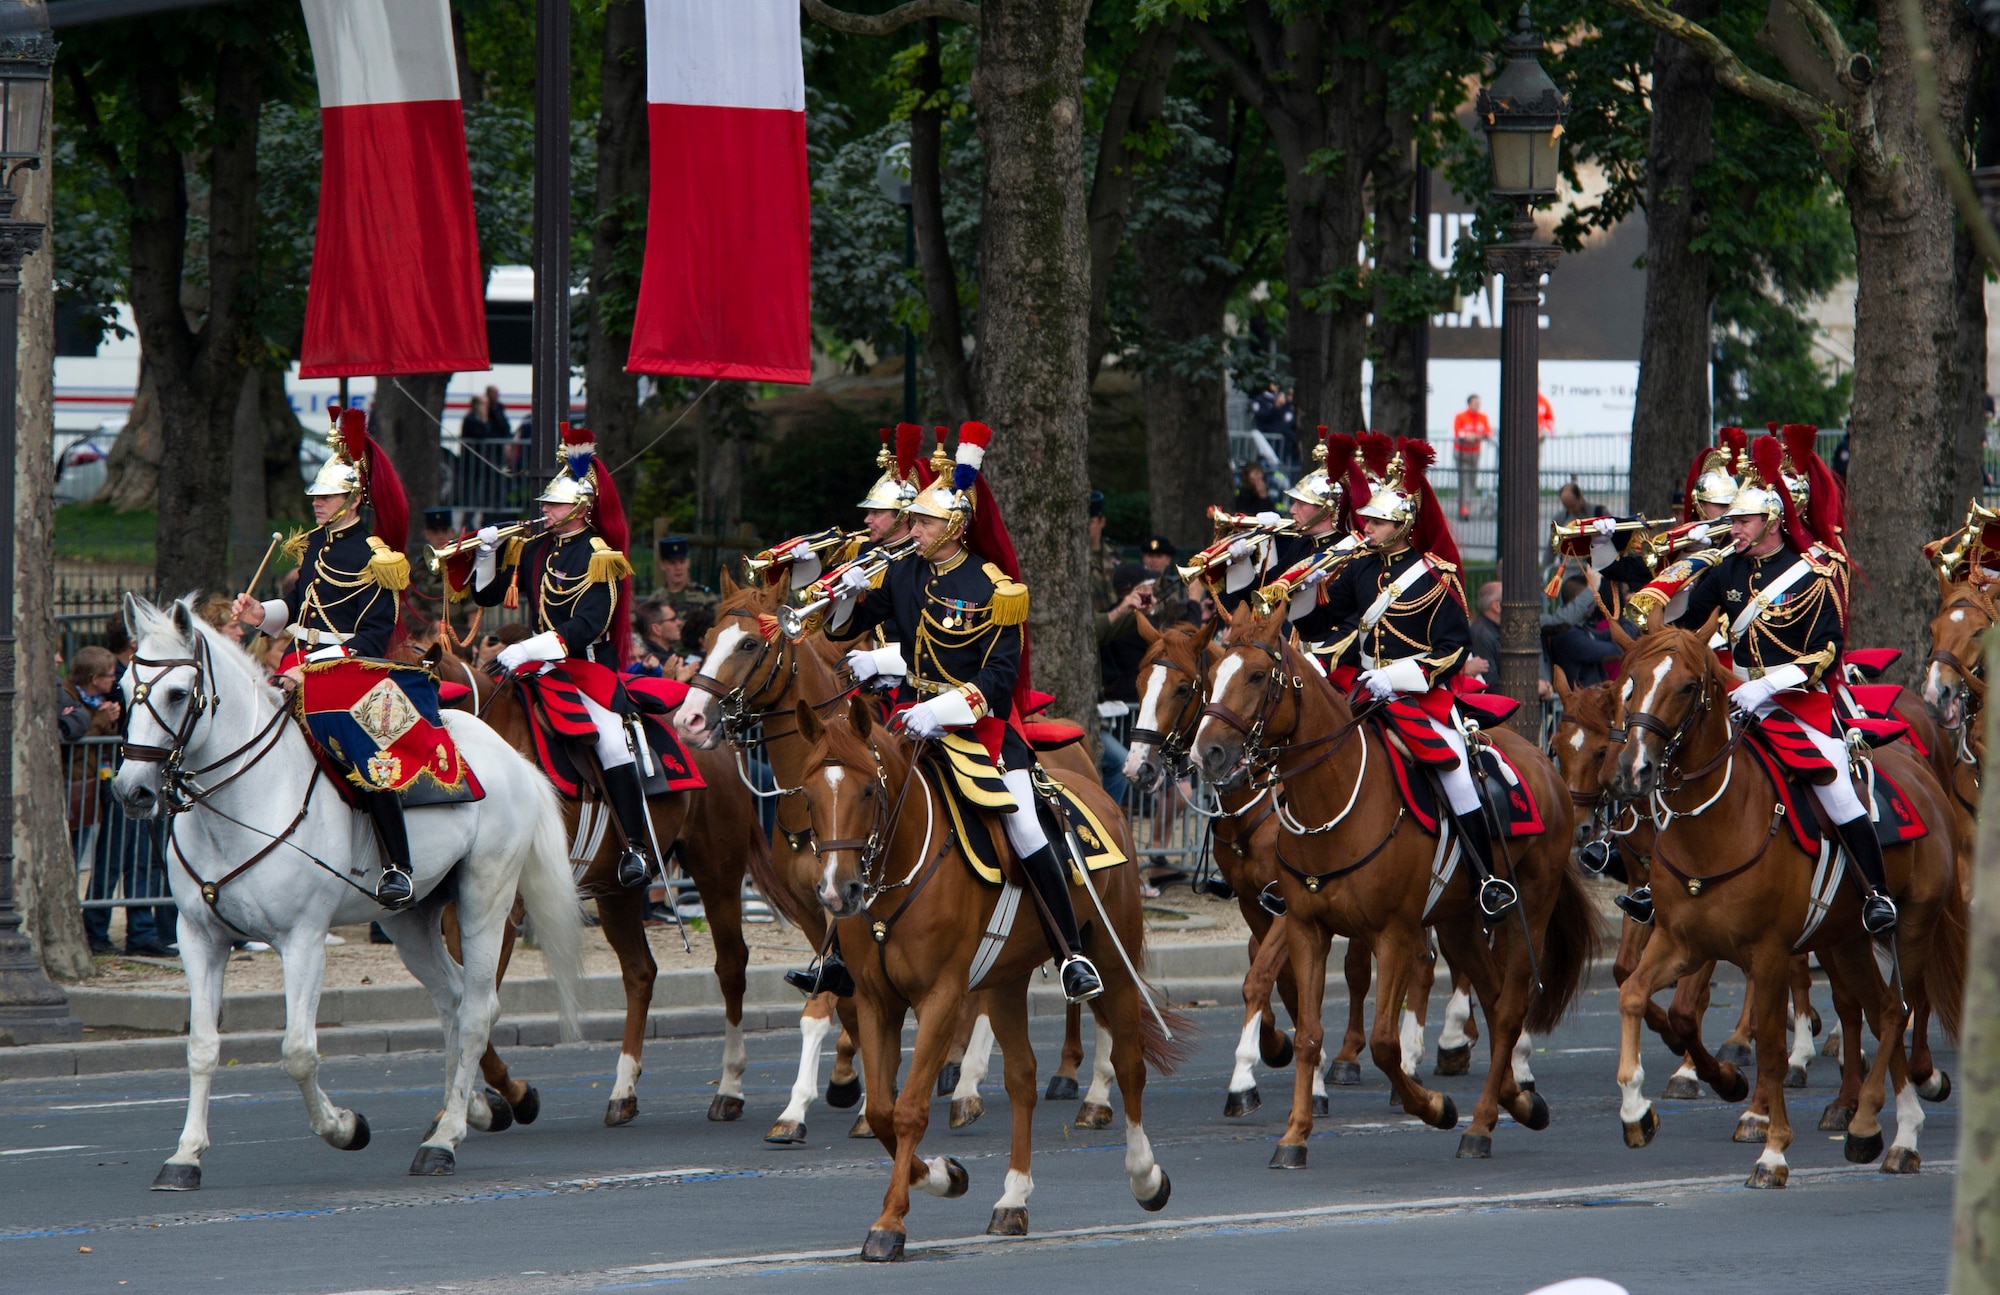 PARIS -- Members of the French cavalry march down Camps del Elysee during the 2012, 14th of July parade in Paris. The 14th of July, known in English by Bastille Day, is the French equivalent of the American 4th of July. It commemorates the attack on the Bastille on July 14, 1989, which preceded the French revolution. (U.S. Air Force photo/Staff Sgt. Benjamin Wilson)